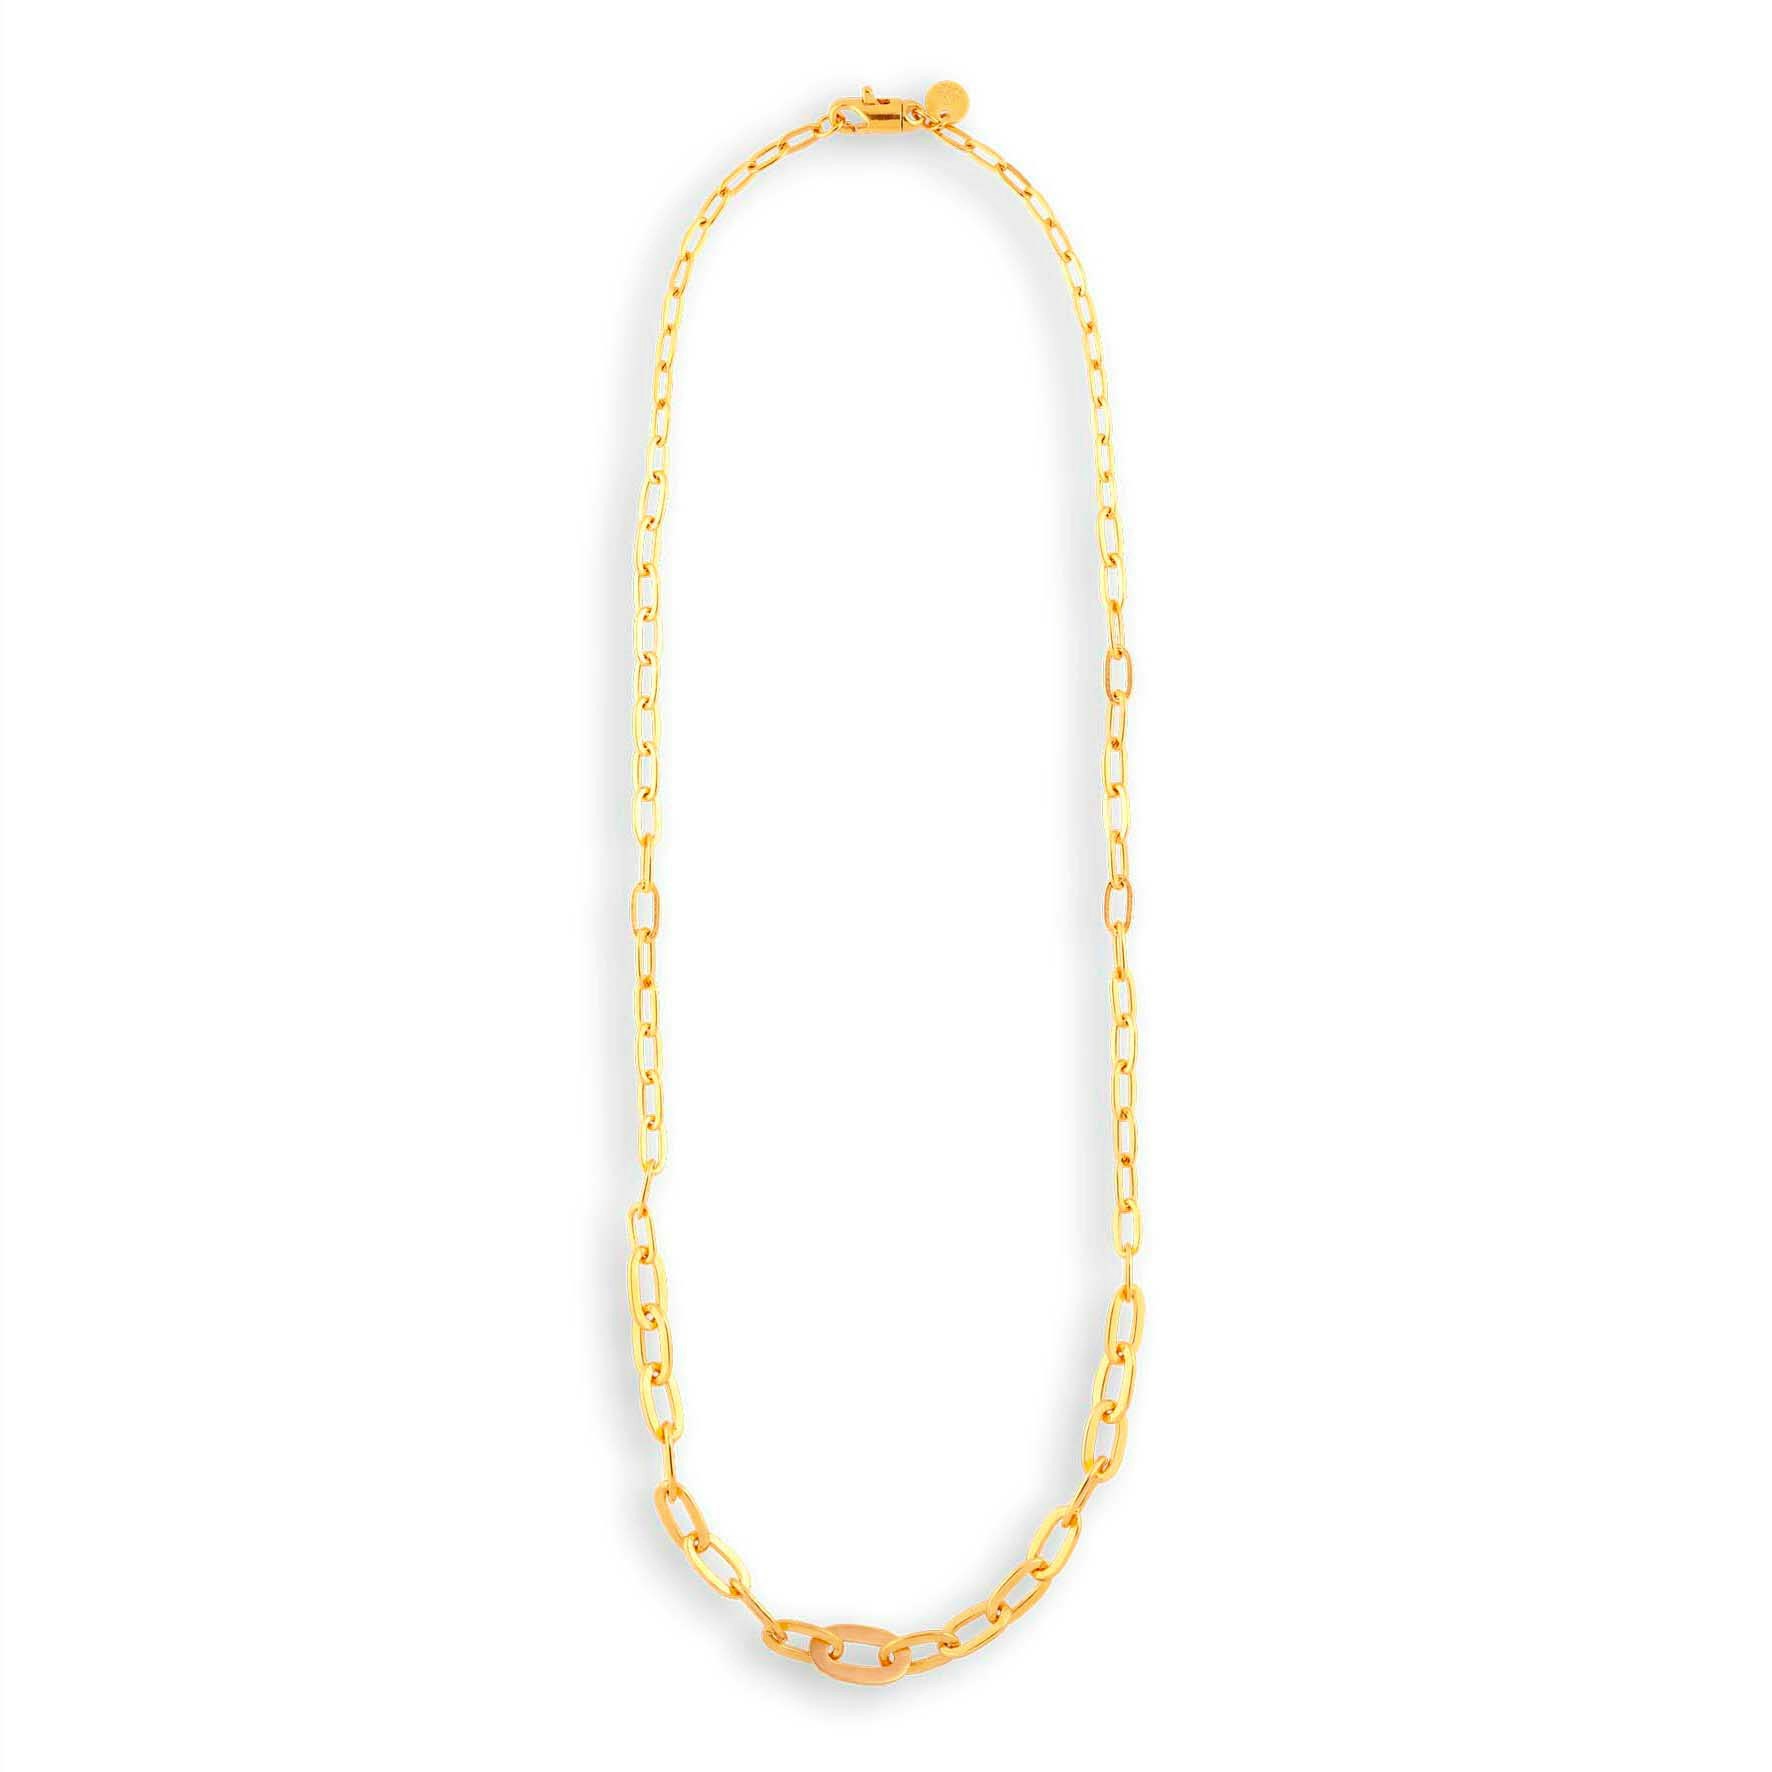 Row Chain Necklace from Jane Kønig in Goldplated Silver Sterling 925